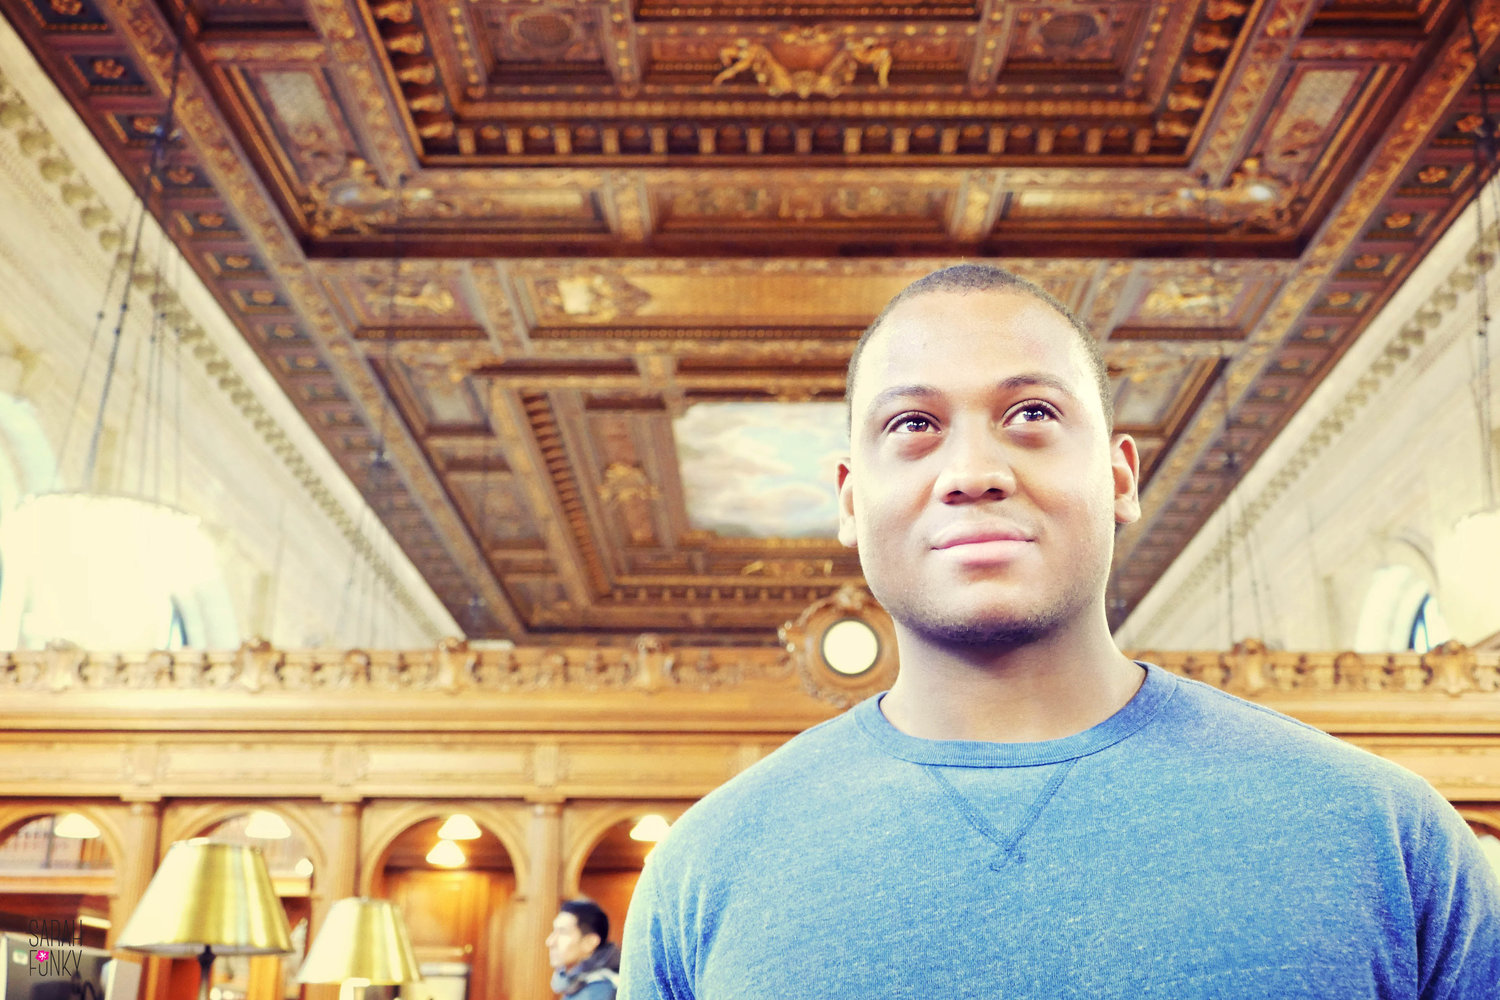 Kadeem taking a pause in the Rose Reading Room